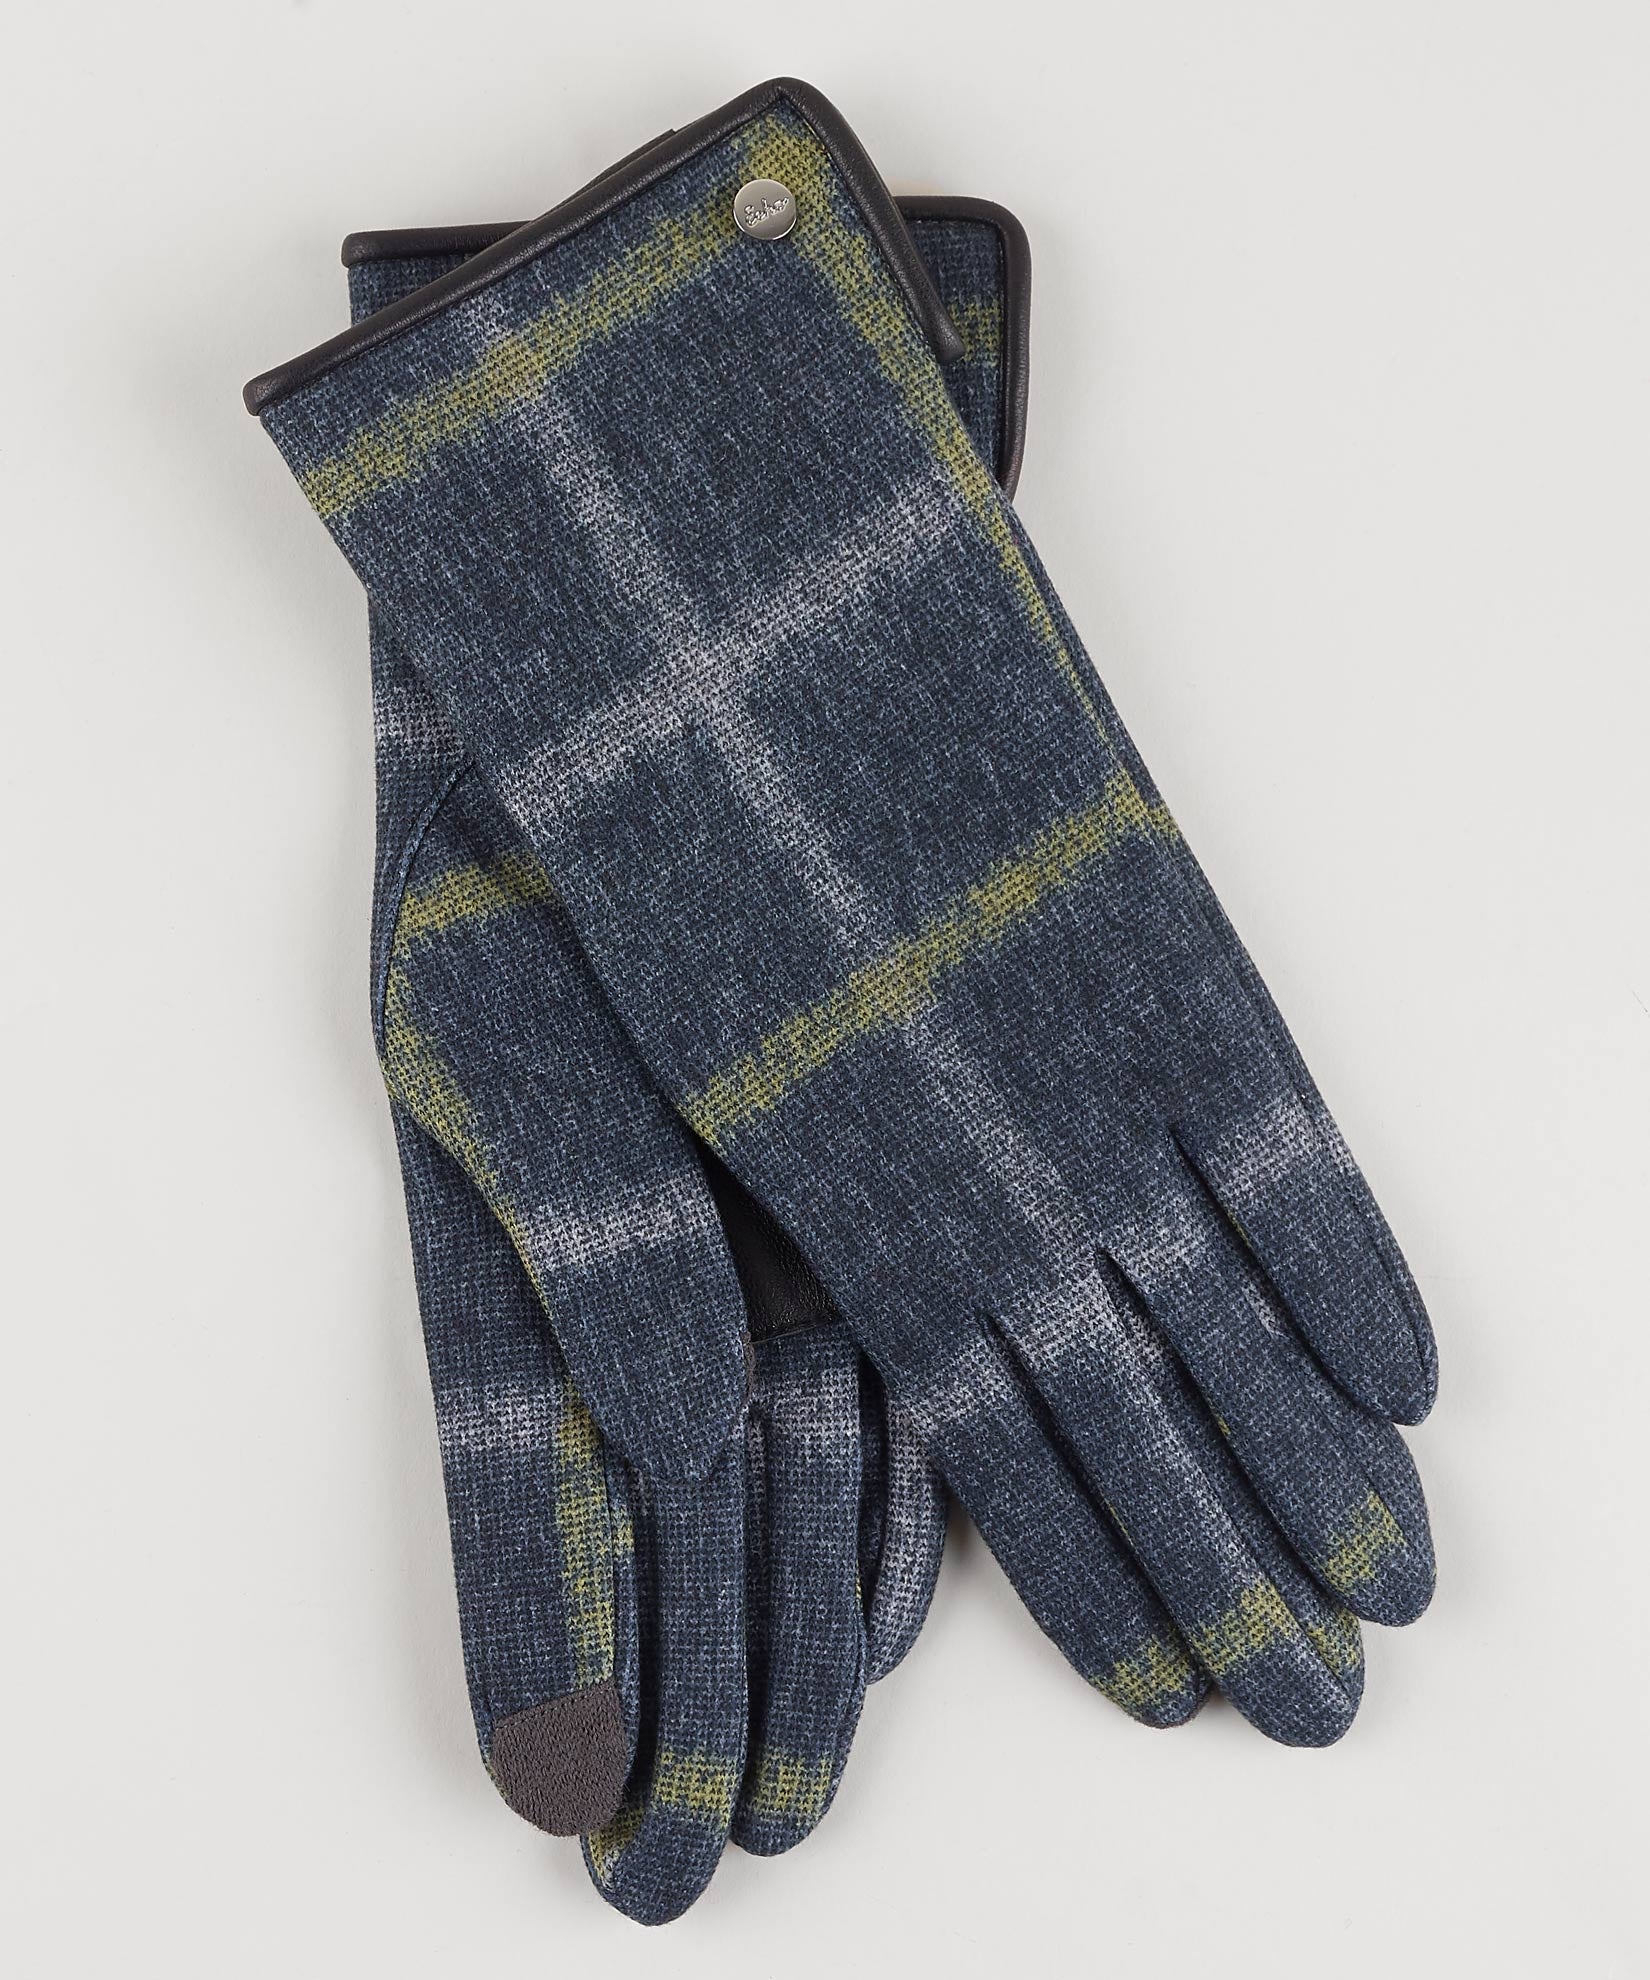 Superfine Down Plaid Glove in color Charcoal